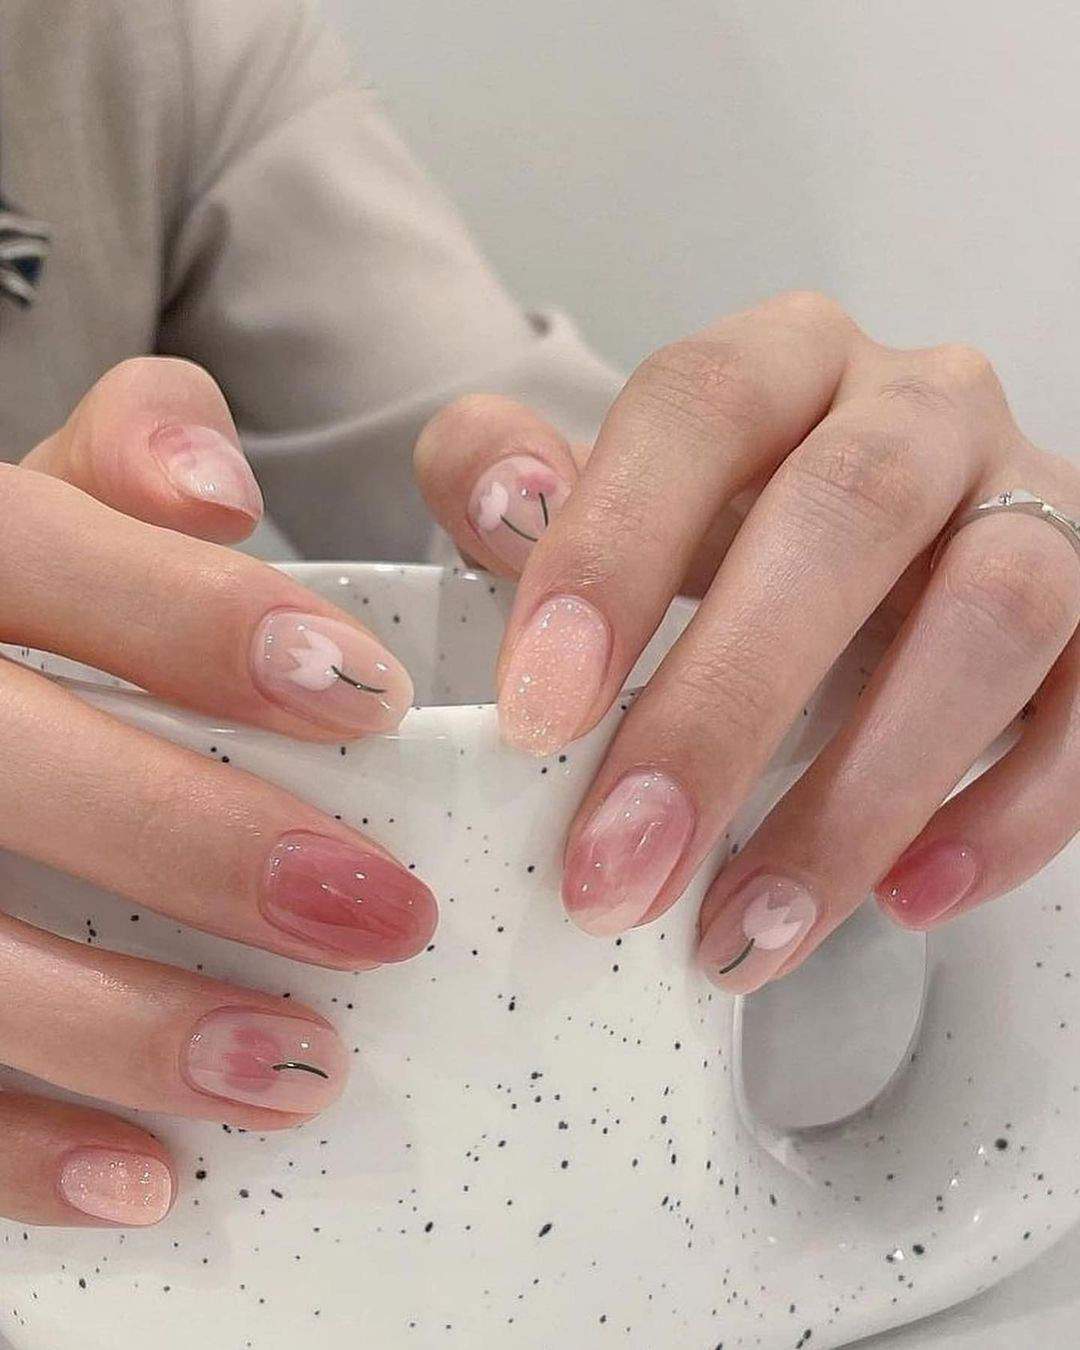 The 100+ Best Nail Designs Trends And Ideas In 2021 images 48